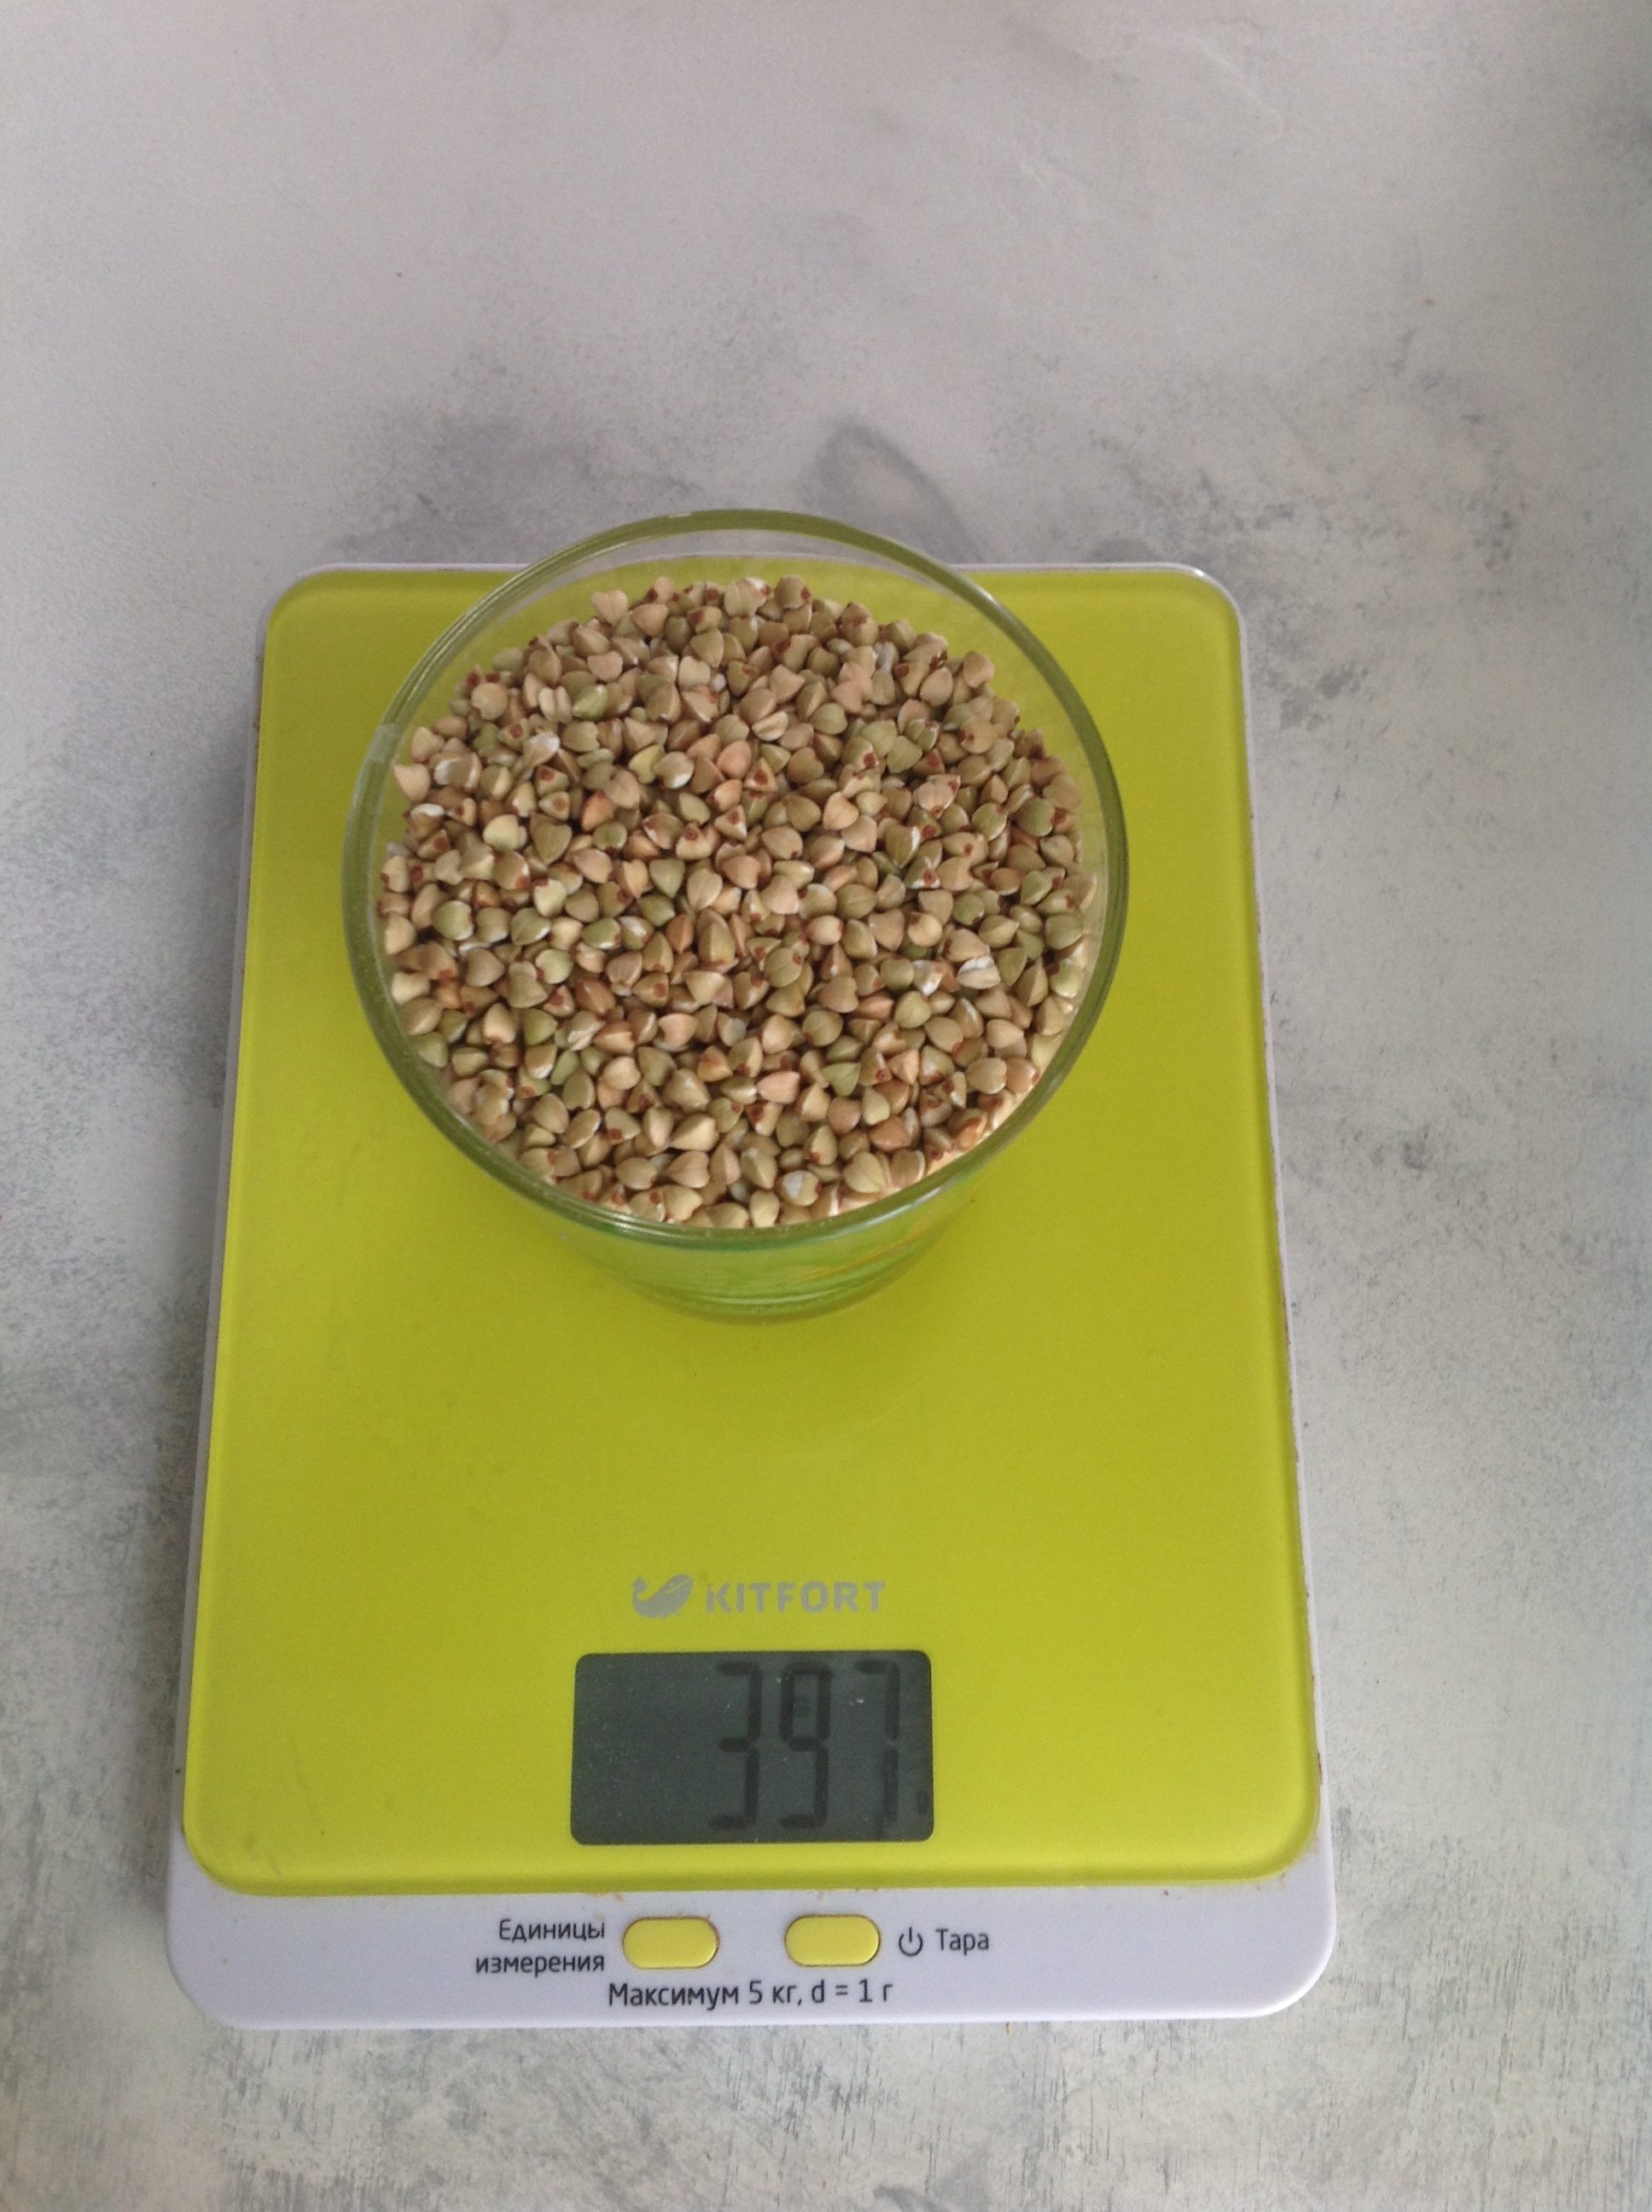 weight of green buckwheat dry in a 250 ml glass